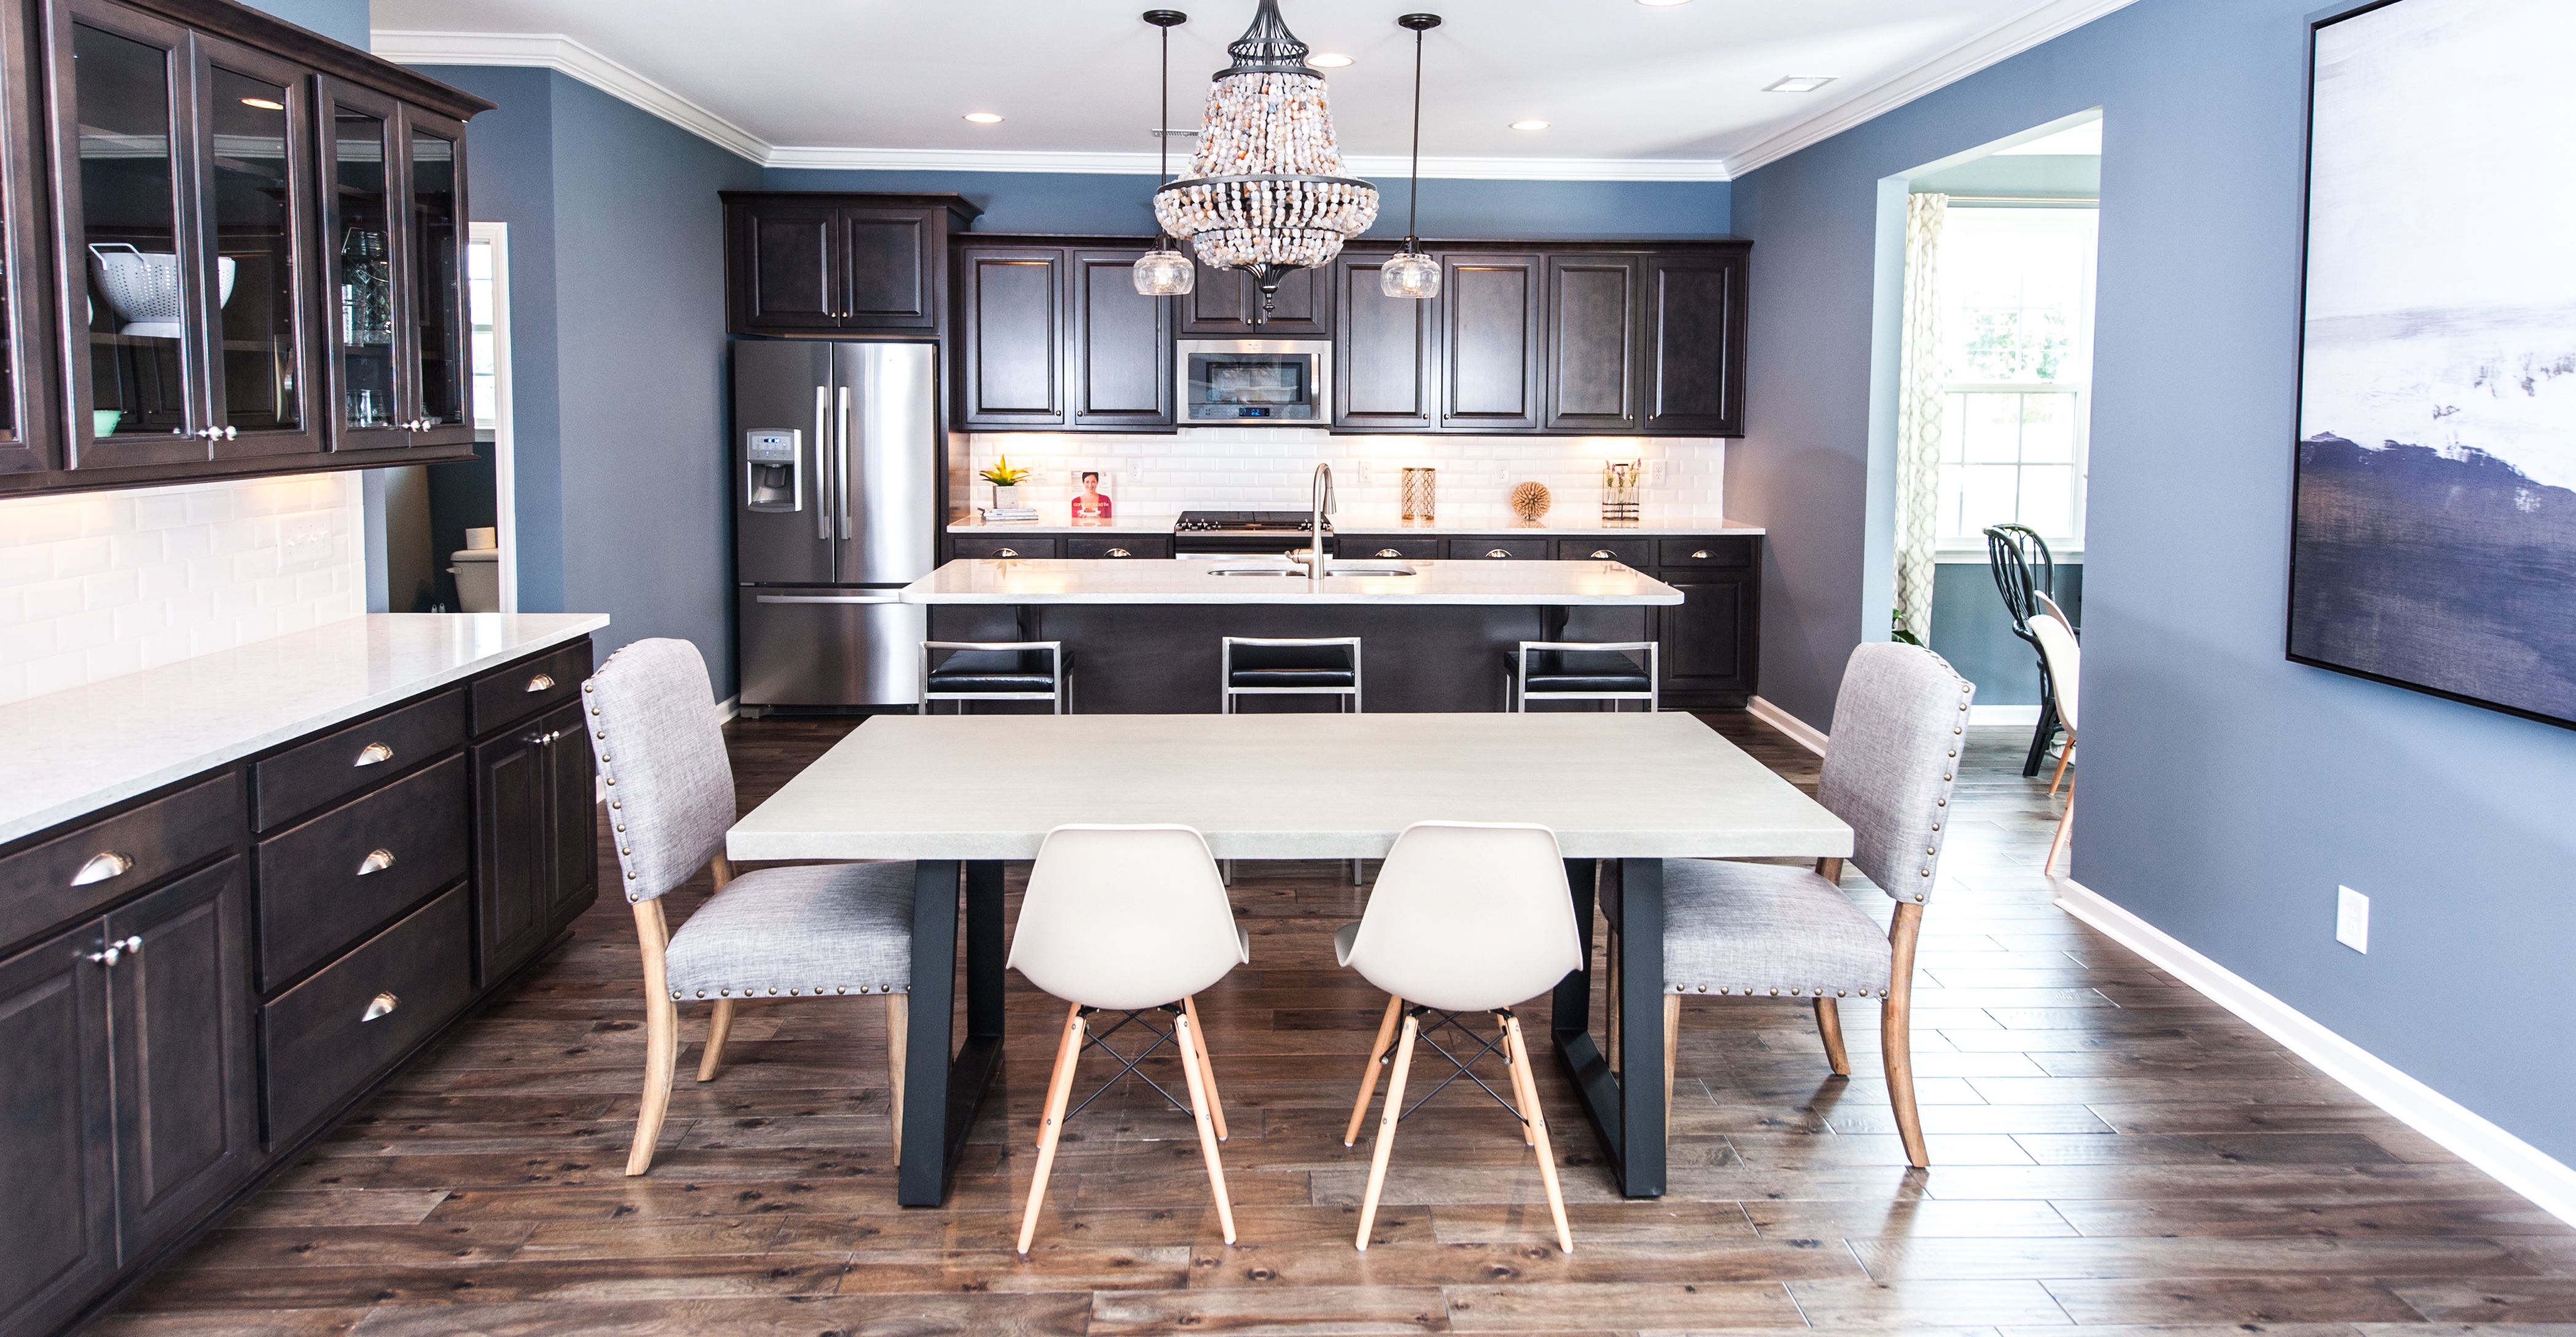 Kitchen size is essential in evaluating square feet for your home.